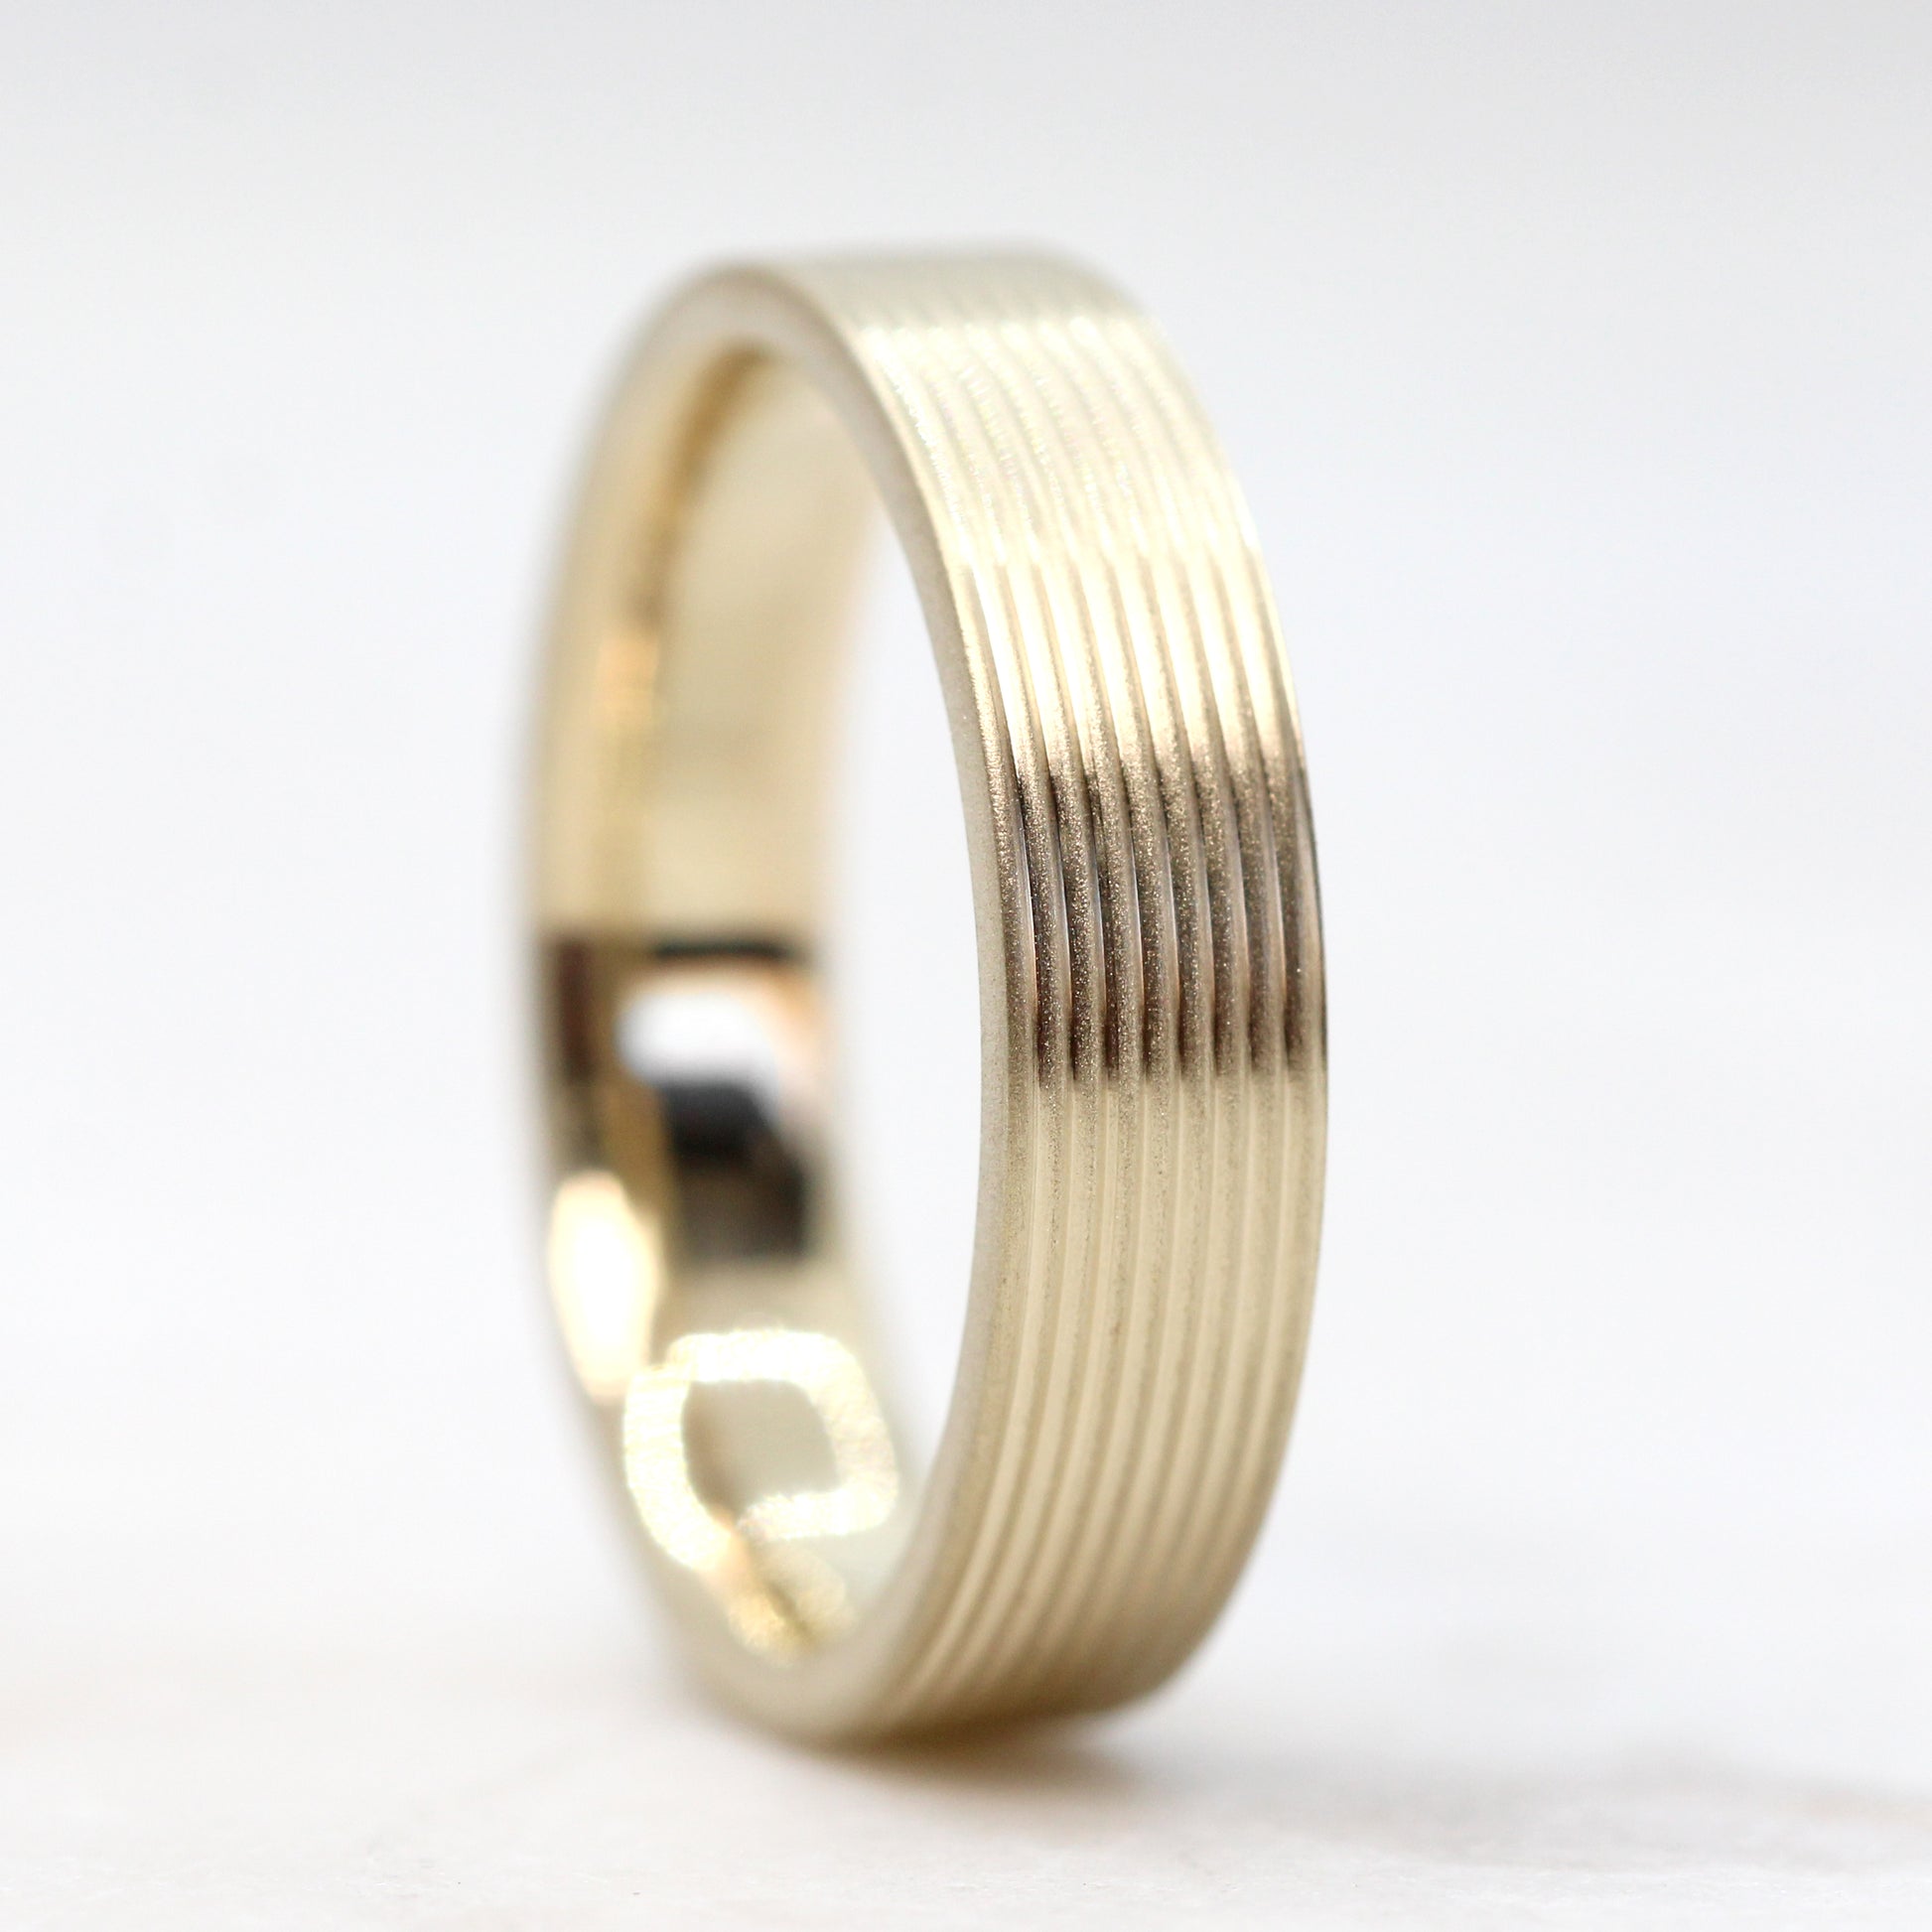 Kody Band - Unisex Wedding Band - Made to Order, Choose Your Gold Tone - Midwinter Co. Alternative Bridal Rings and Modern Fine Jewelry